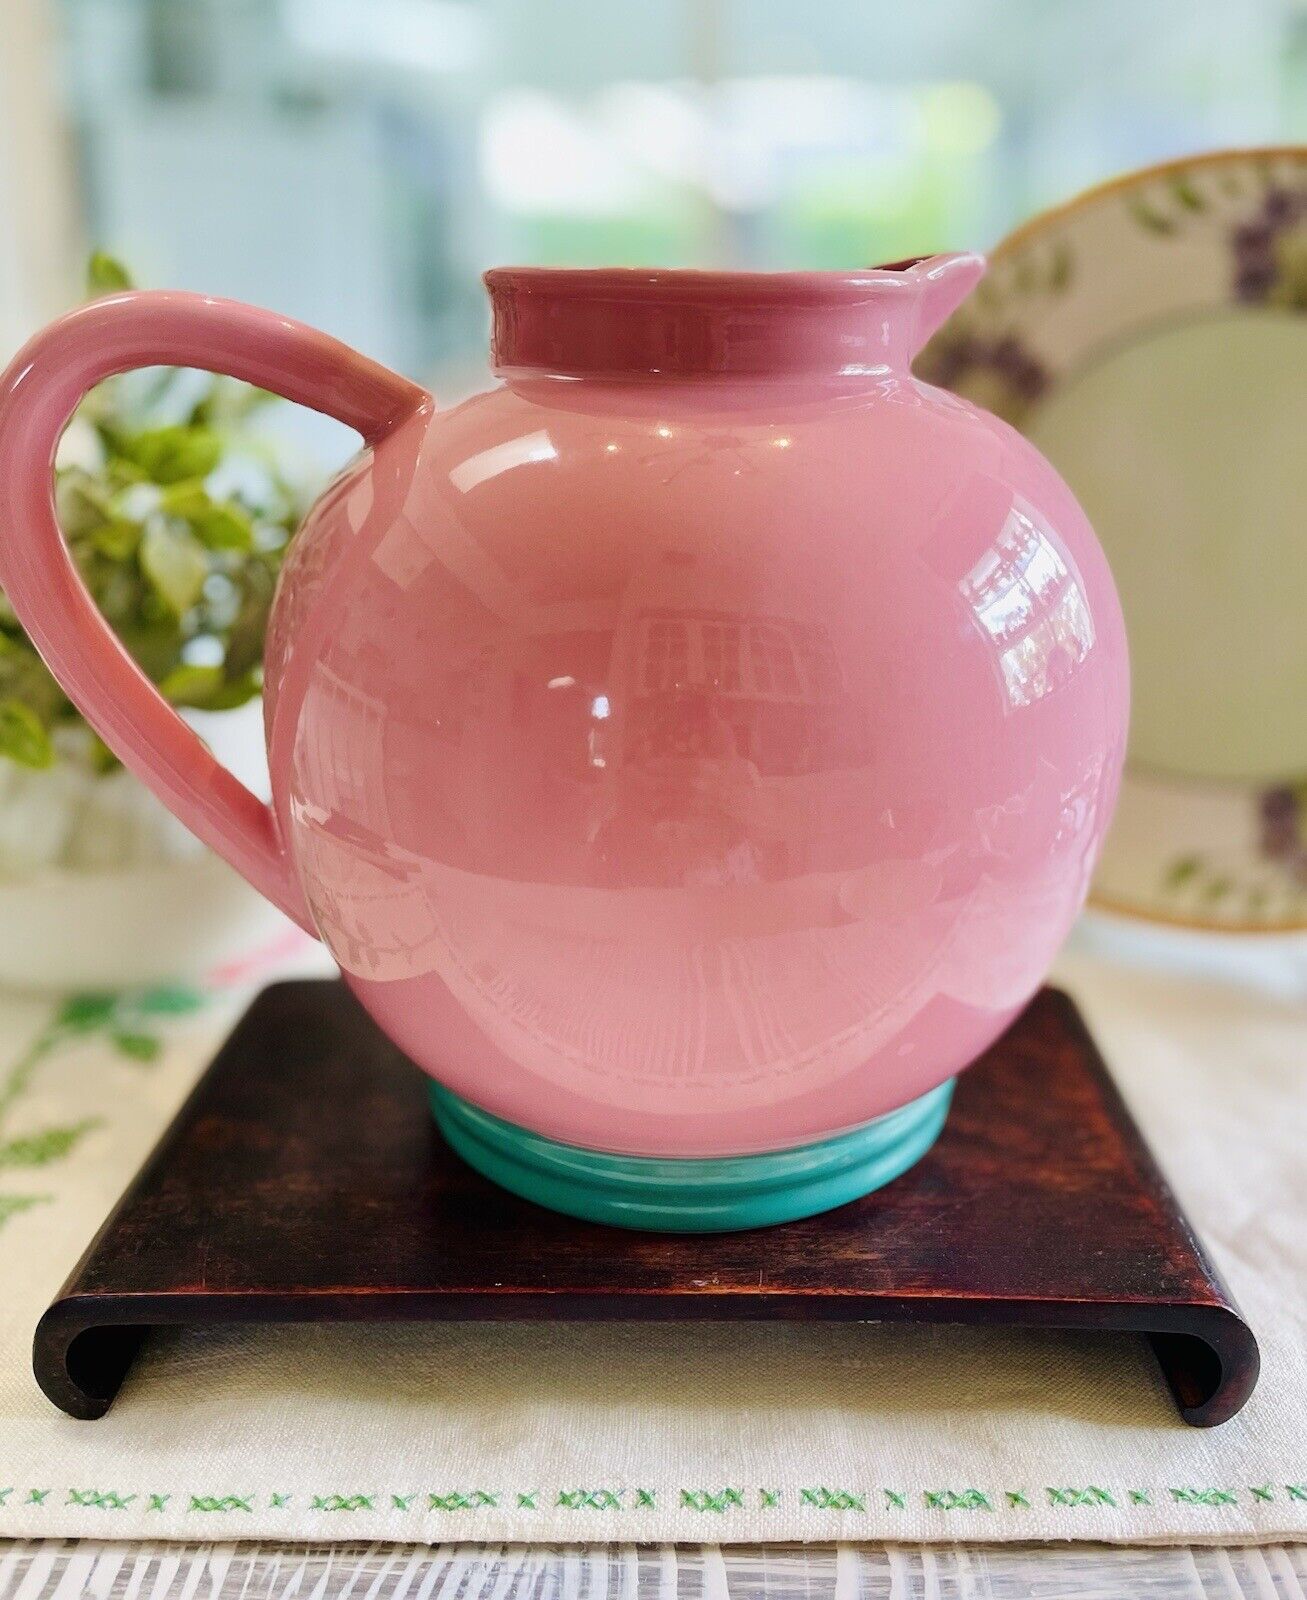 Fatbelly Pitcher Lindt-Stymeist COLORWAYS PATTERN 2.5 Quart Pink Turquoise Trim